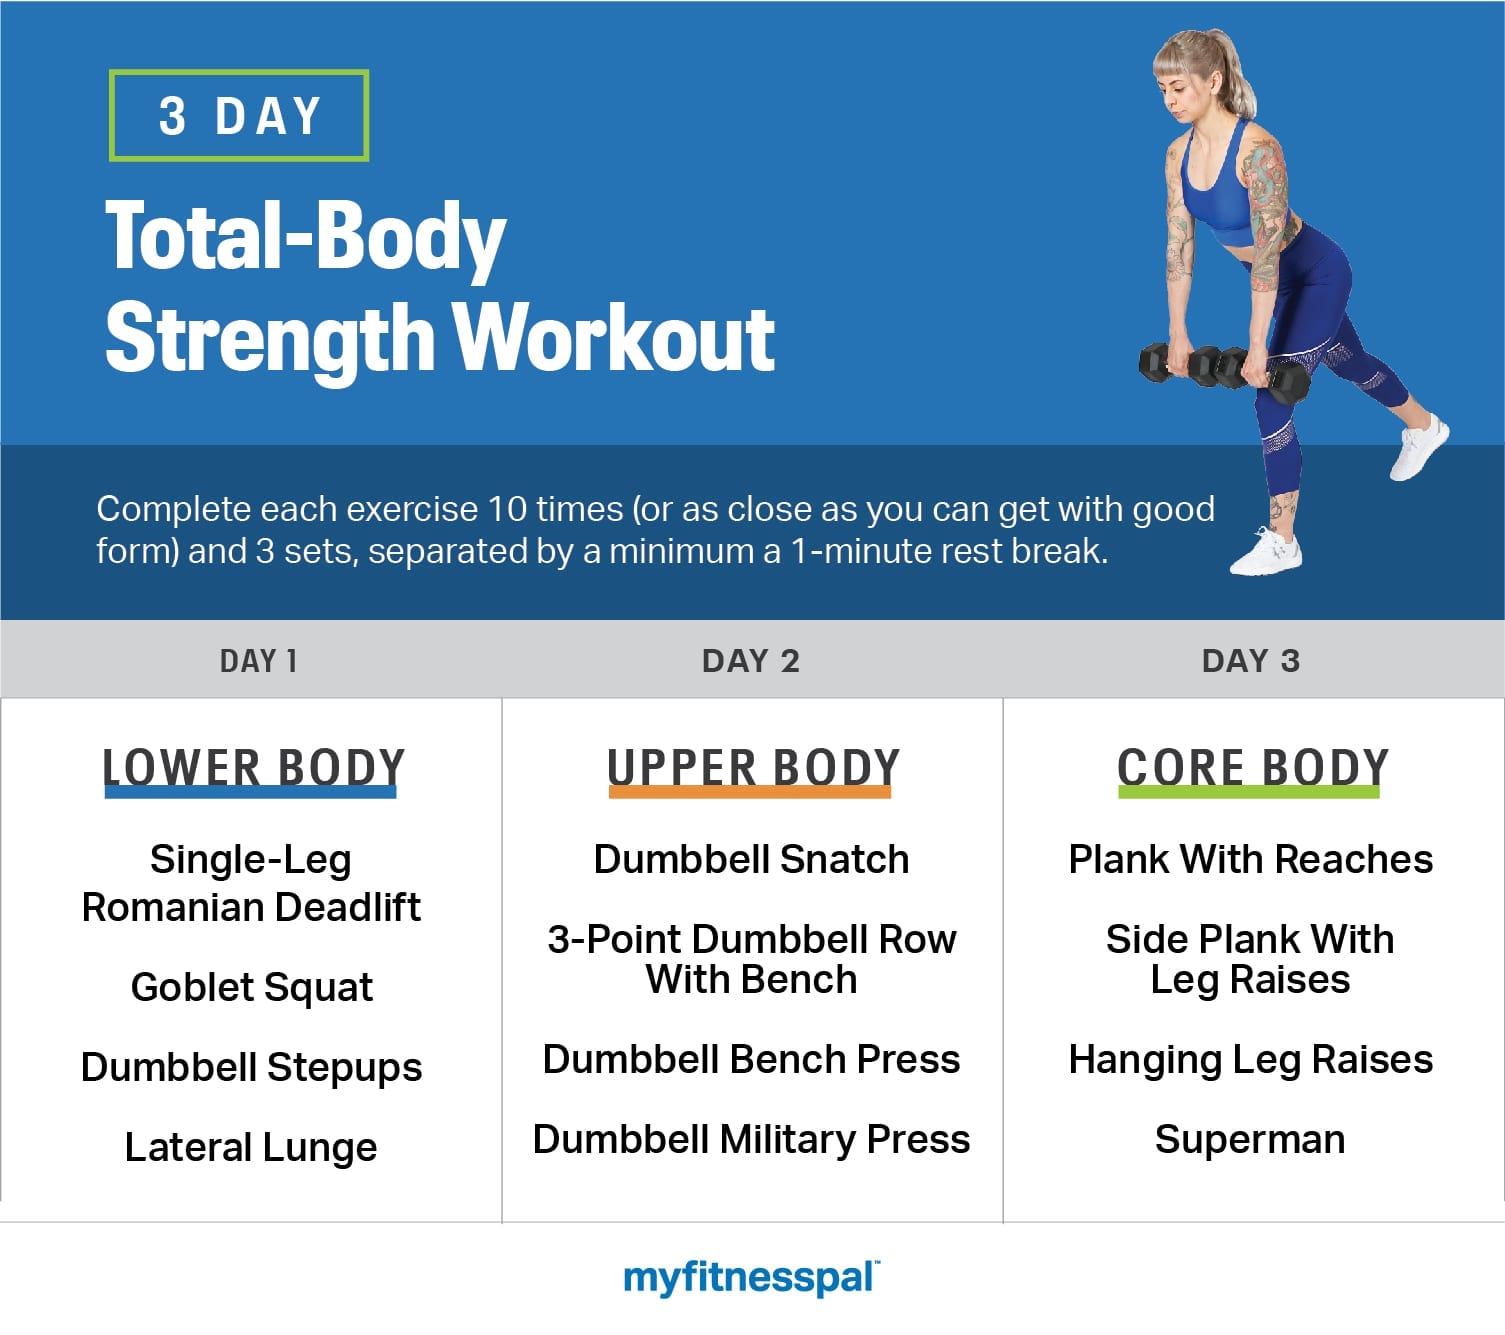 3 Day Total Body Strength Workout